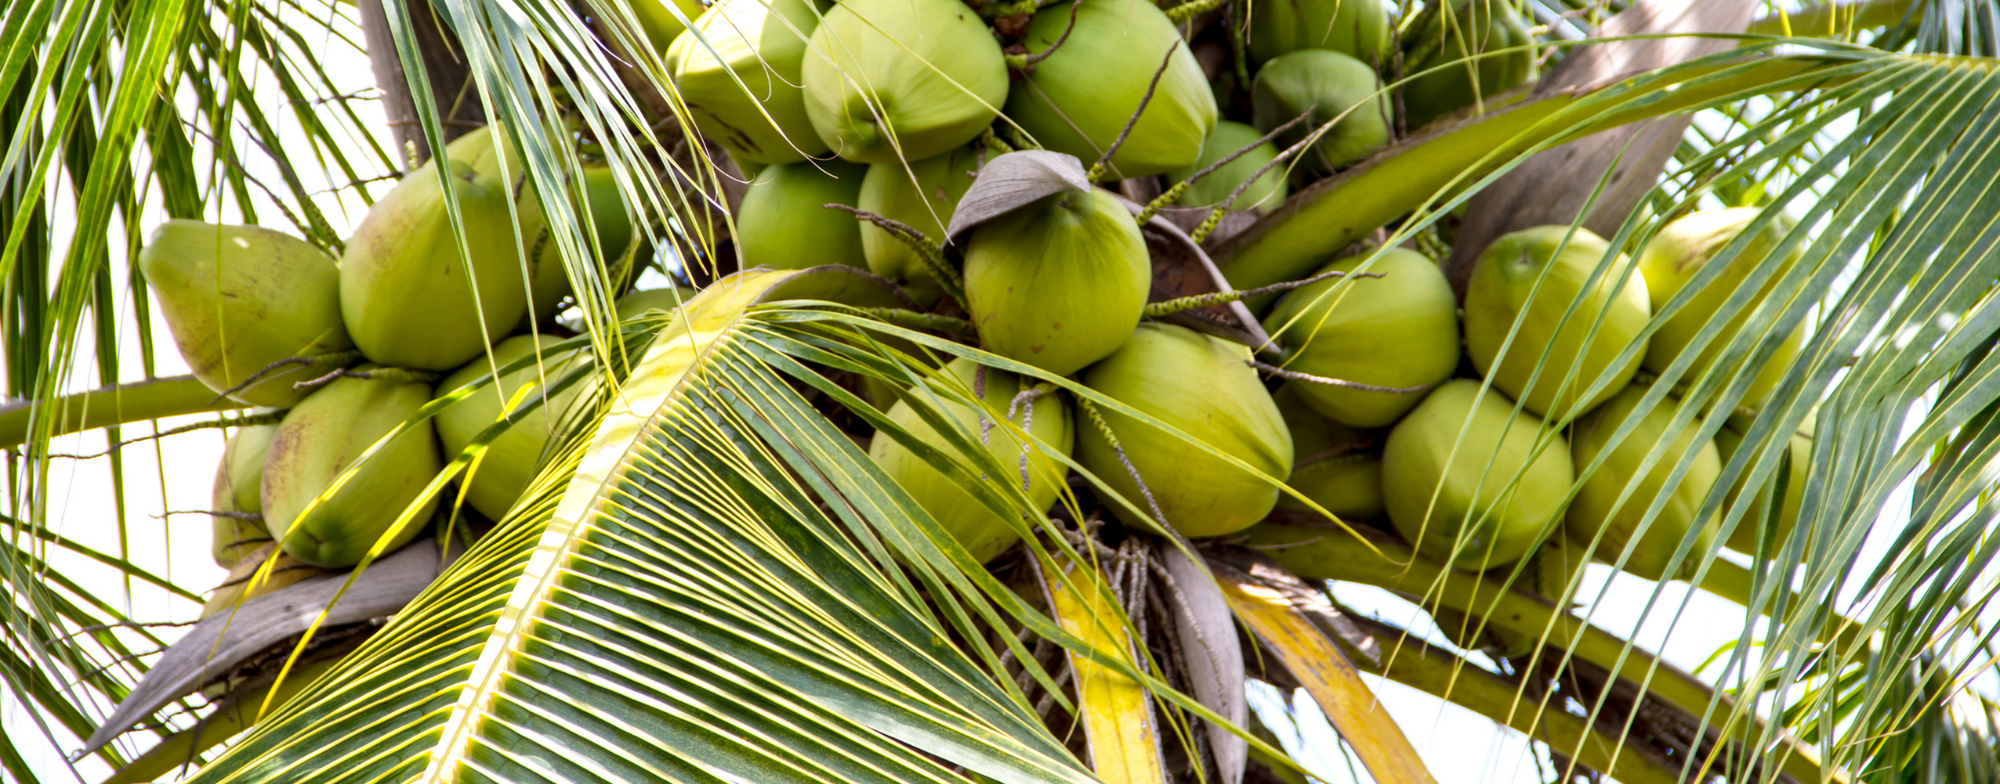 6 Fun Facts You Didn’t Know About Coconuts